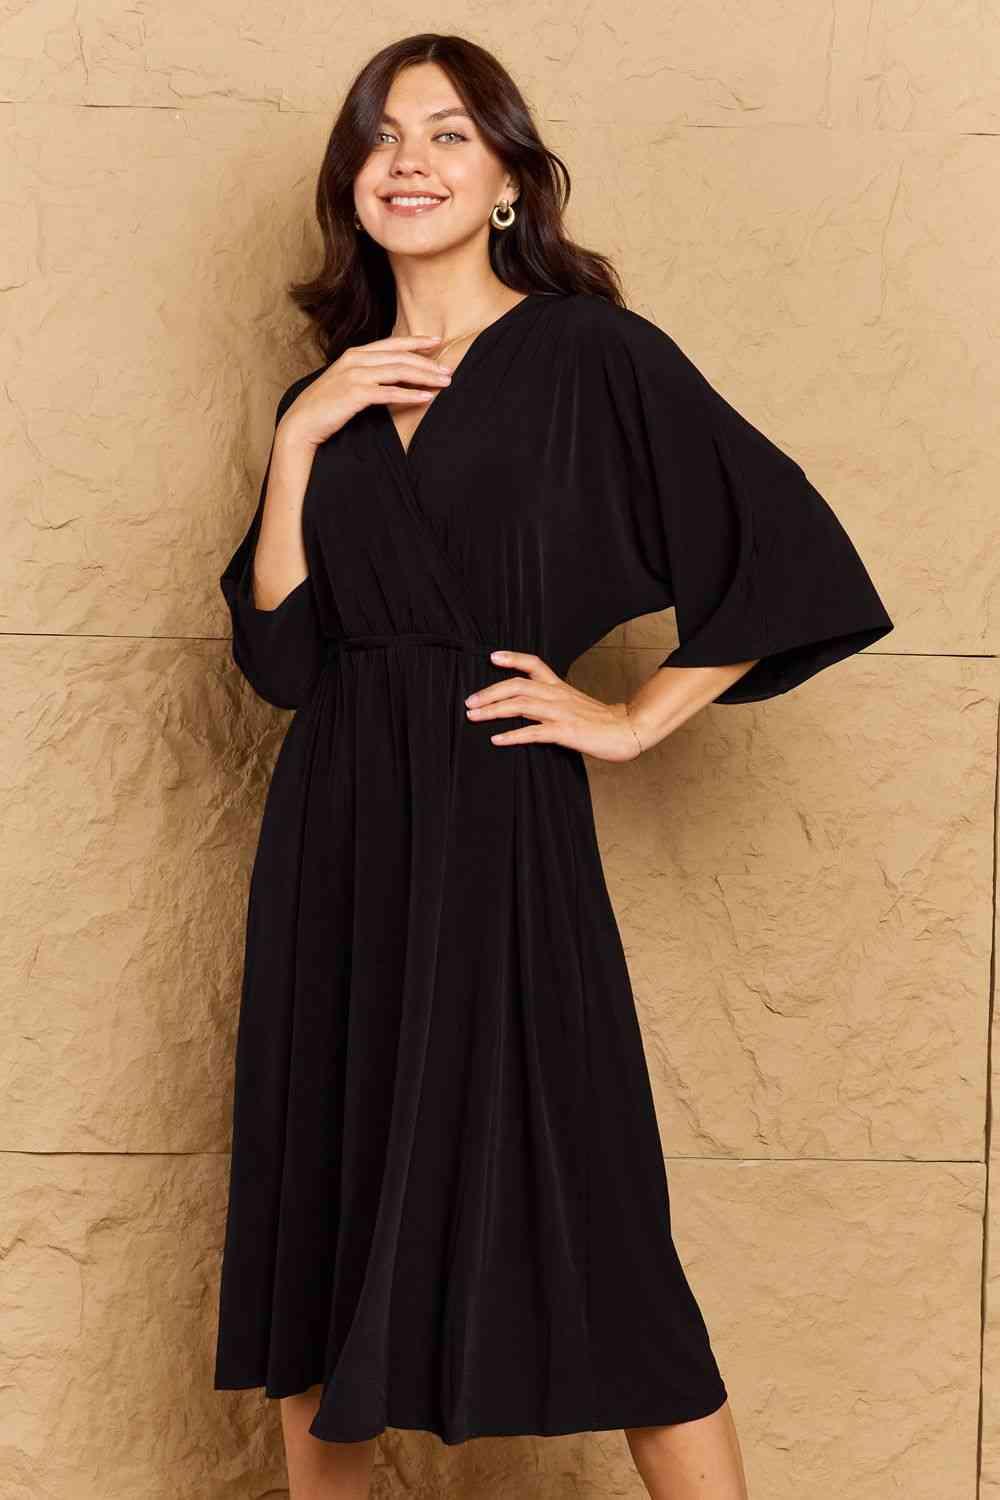 Elegant Solid Black Midi Dress by OneTheLand - God's Girl Gifts And Apparel